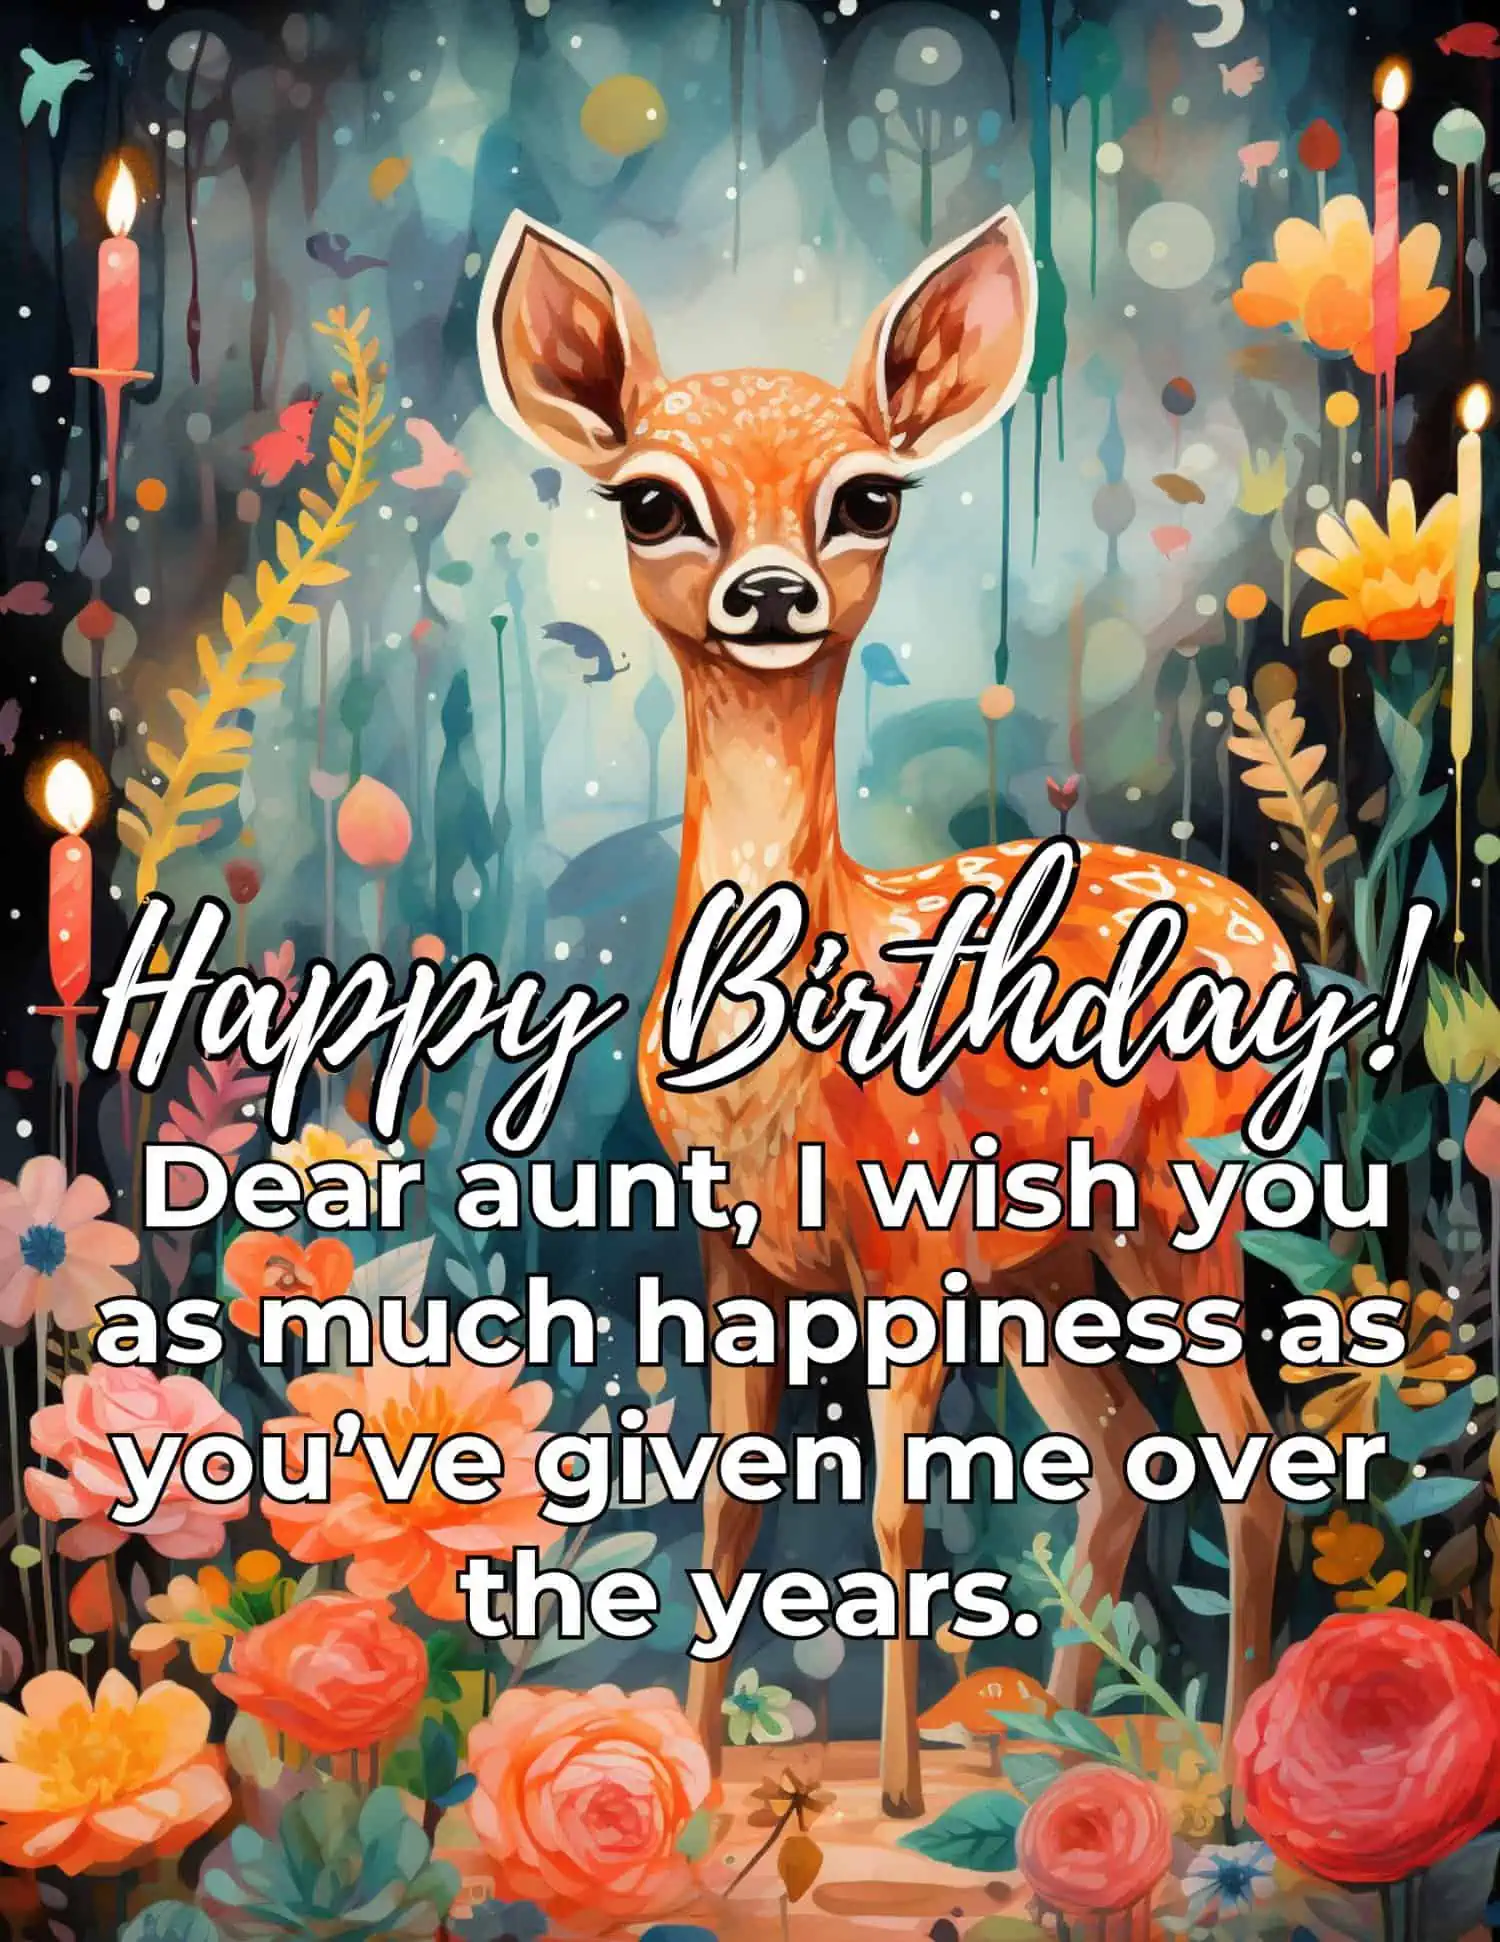 A collection of heartfelt birthday wishes for aunts, reflecting the special bond and appreciation for their love and guidance.